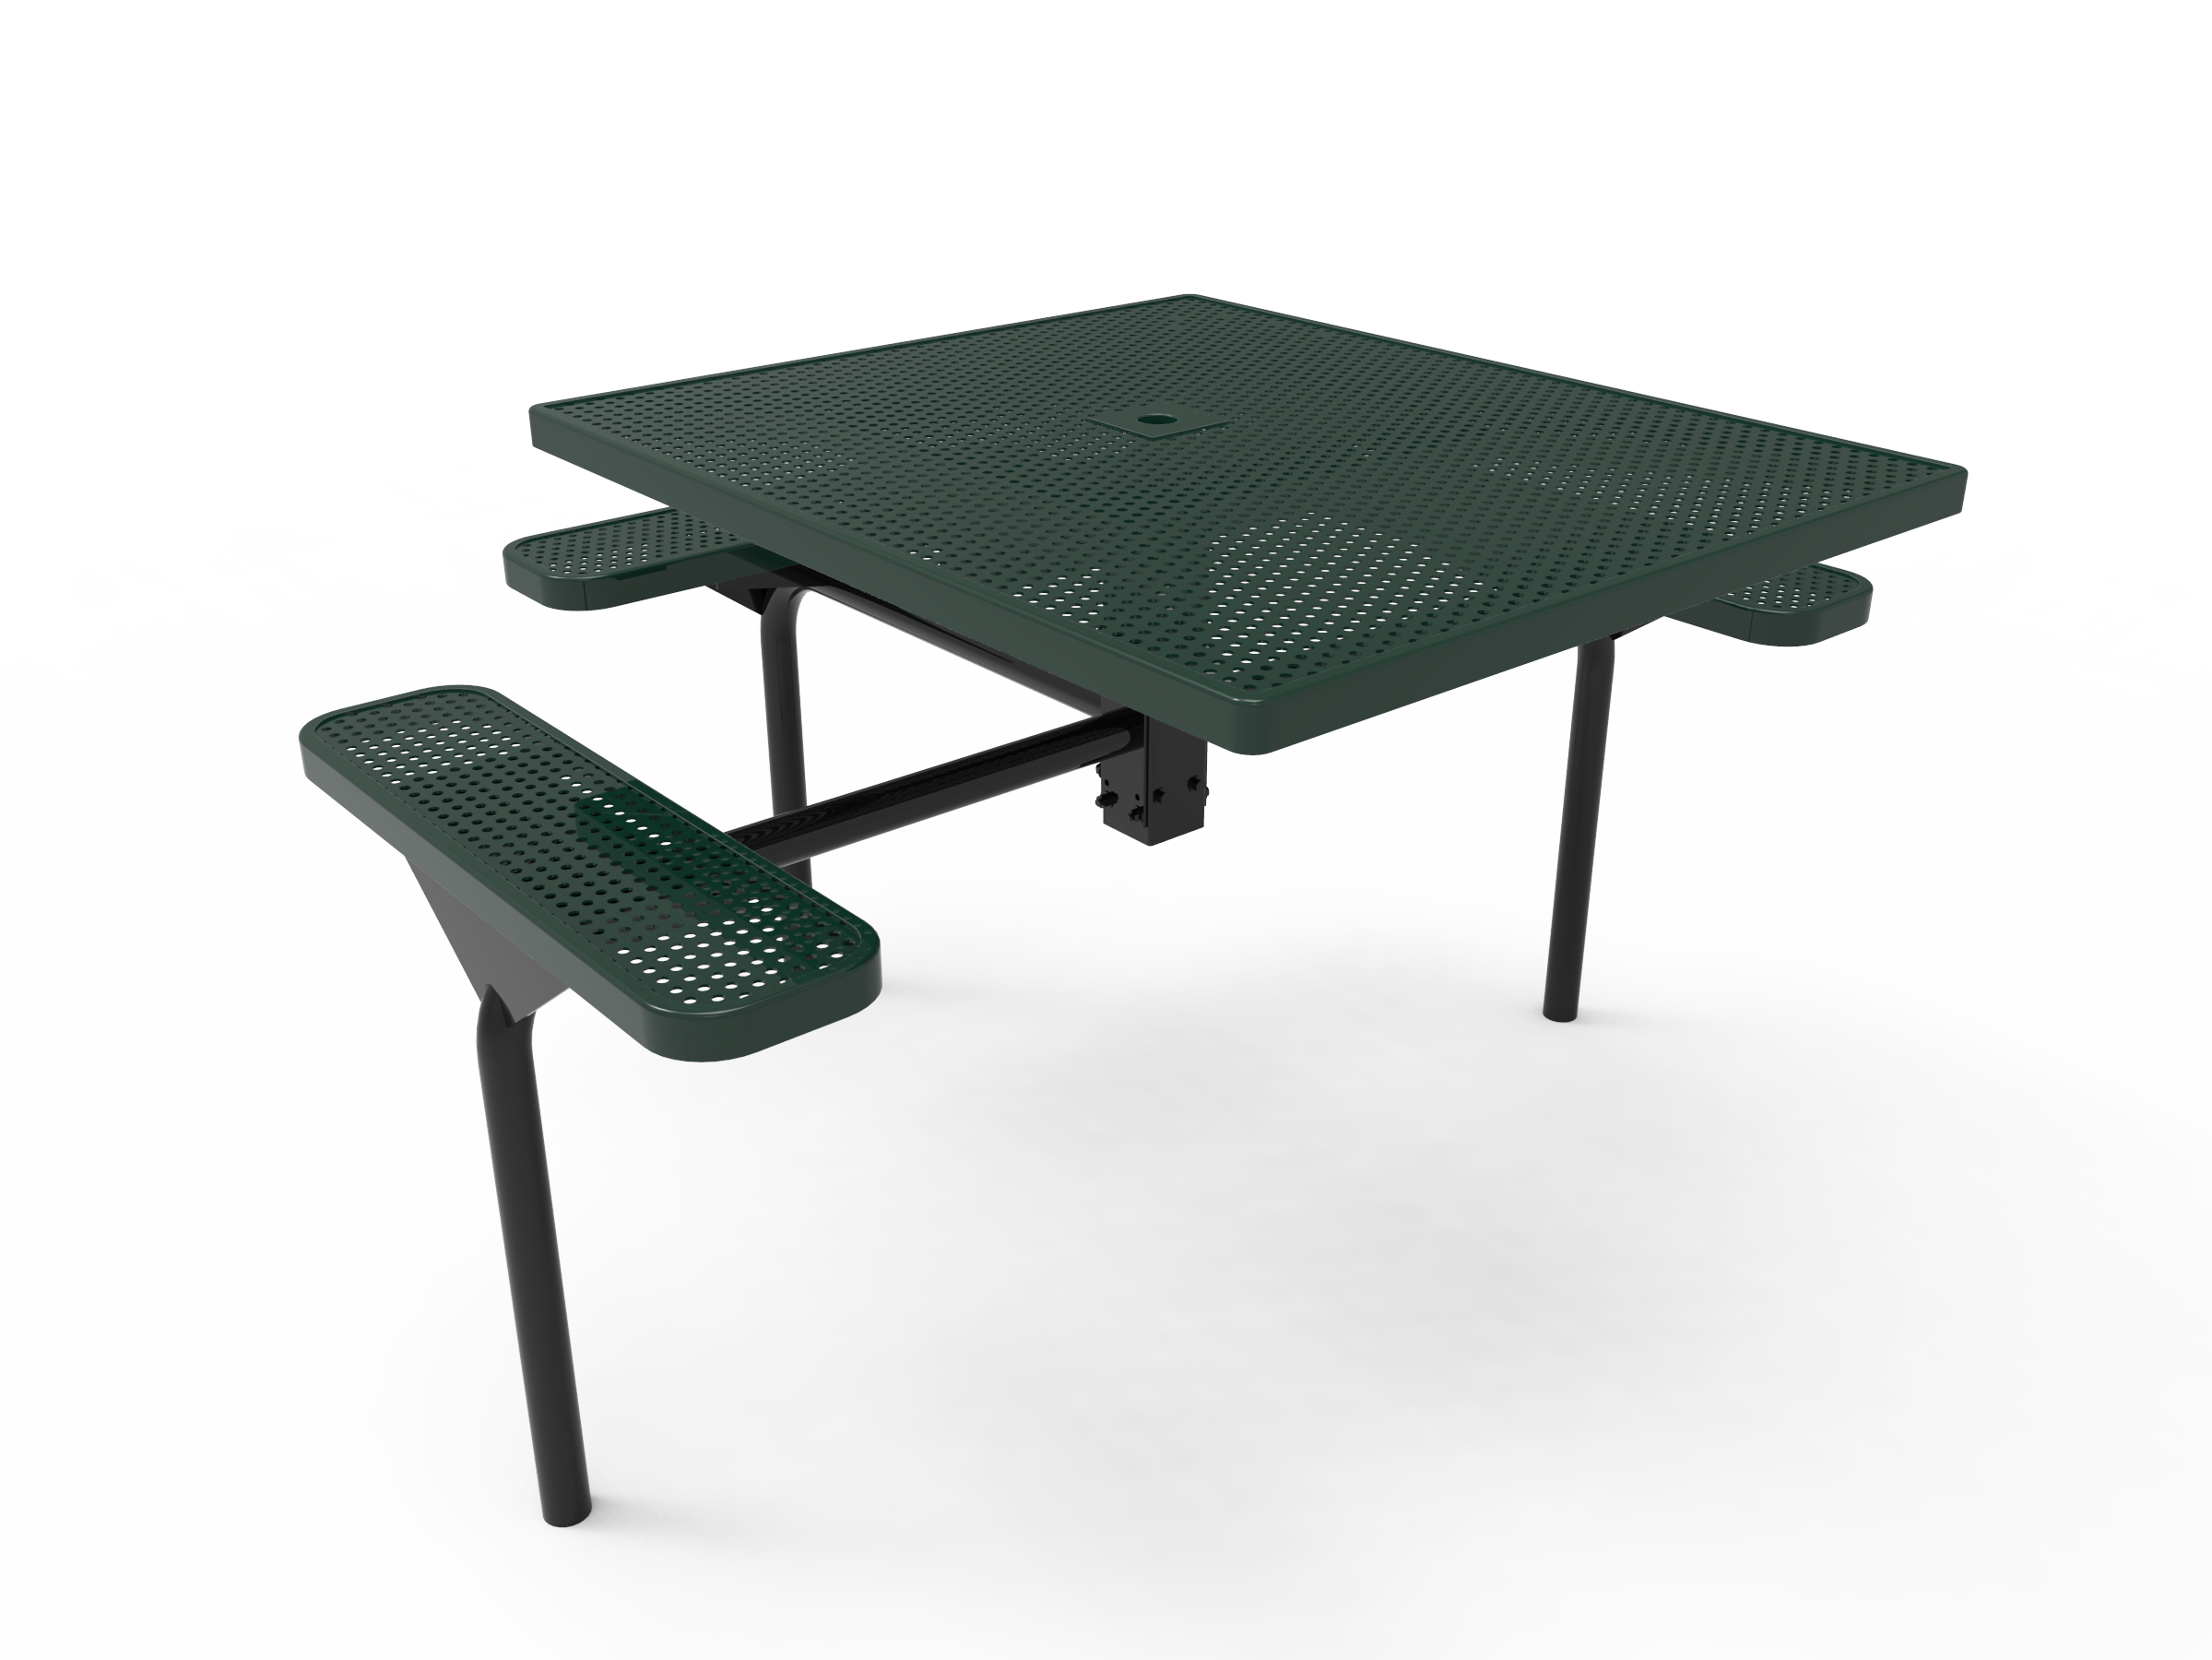 Rivendale Square Nexus Pedestal Table - ADA Accessible, Frame with Powder Coat Finish, Top and Seats with Standard Thermoplastic Coating